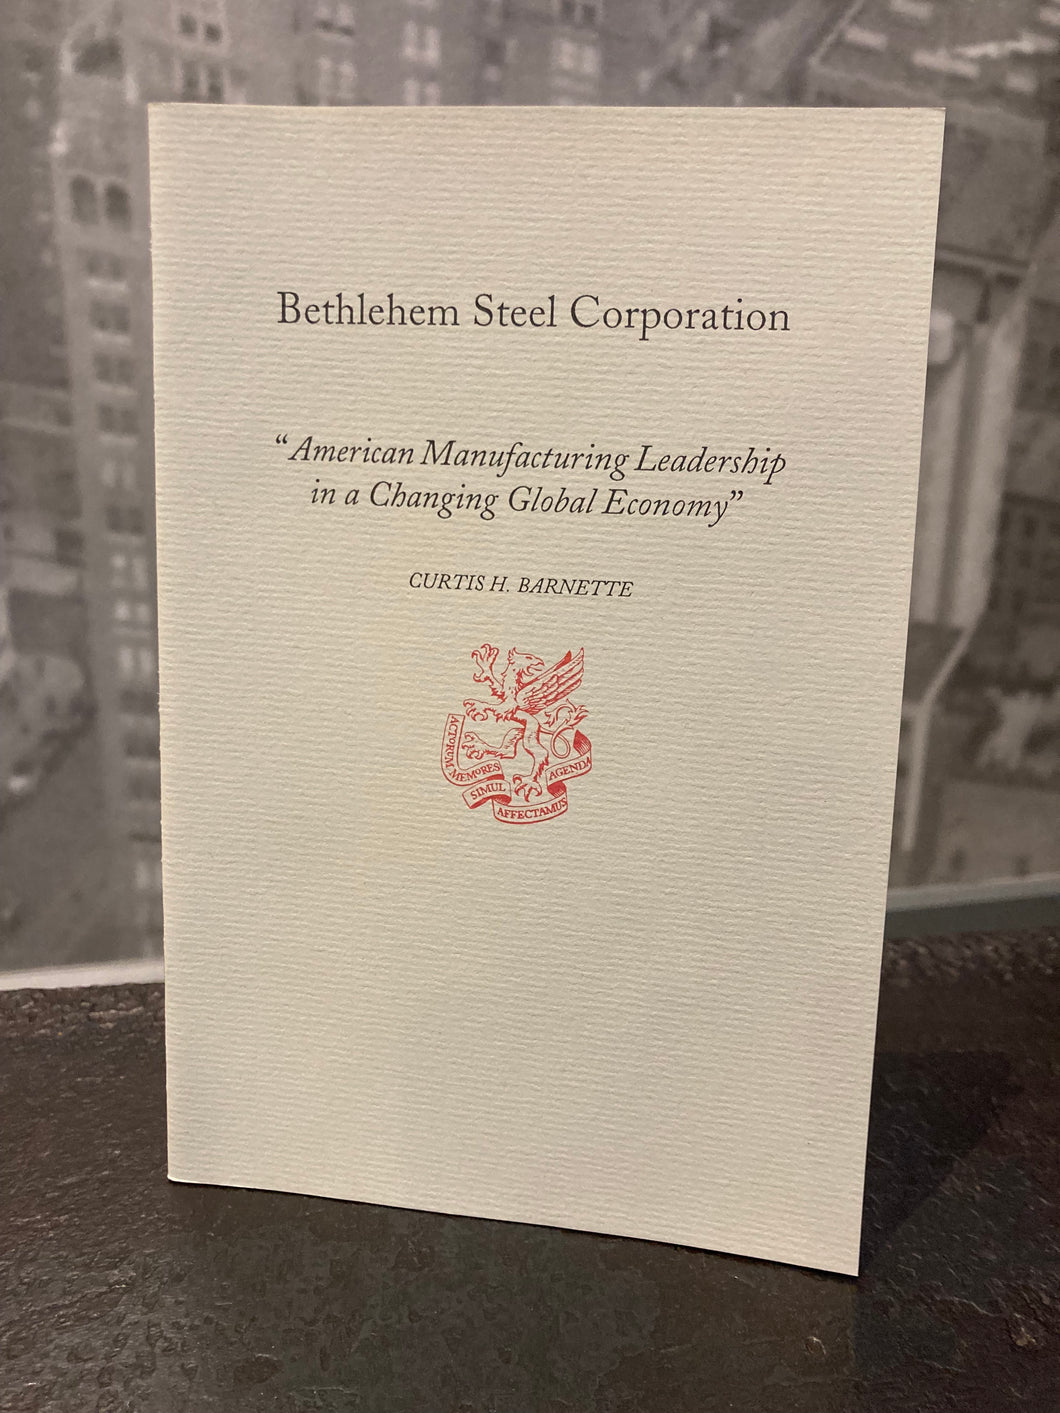 Bethlehem Steel Corporation: American Manufacturing Leadership in a Changing Global Economy